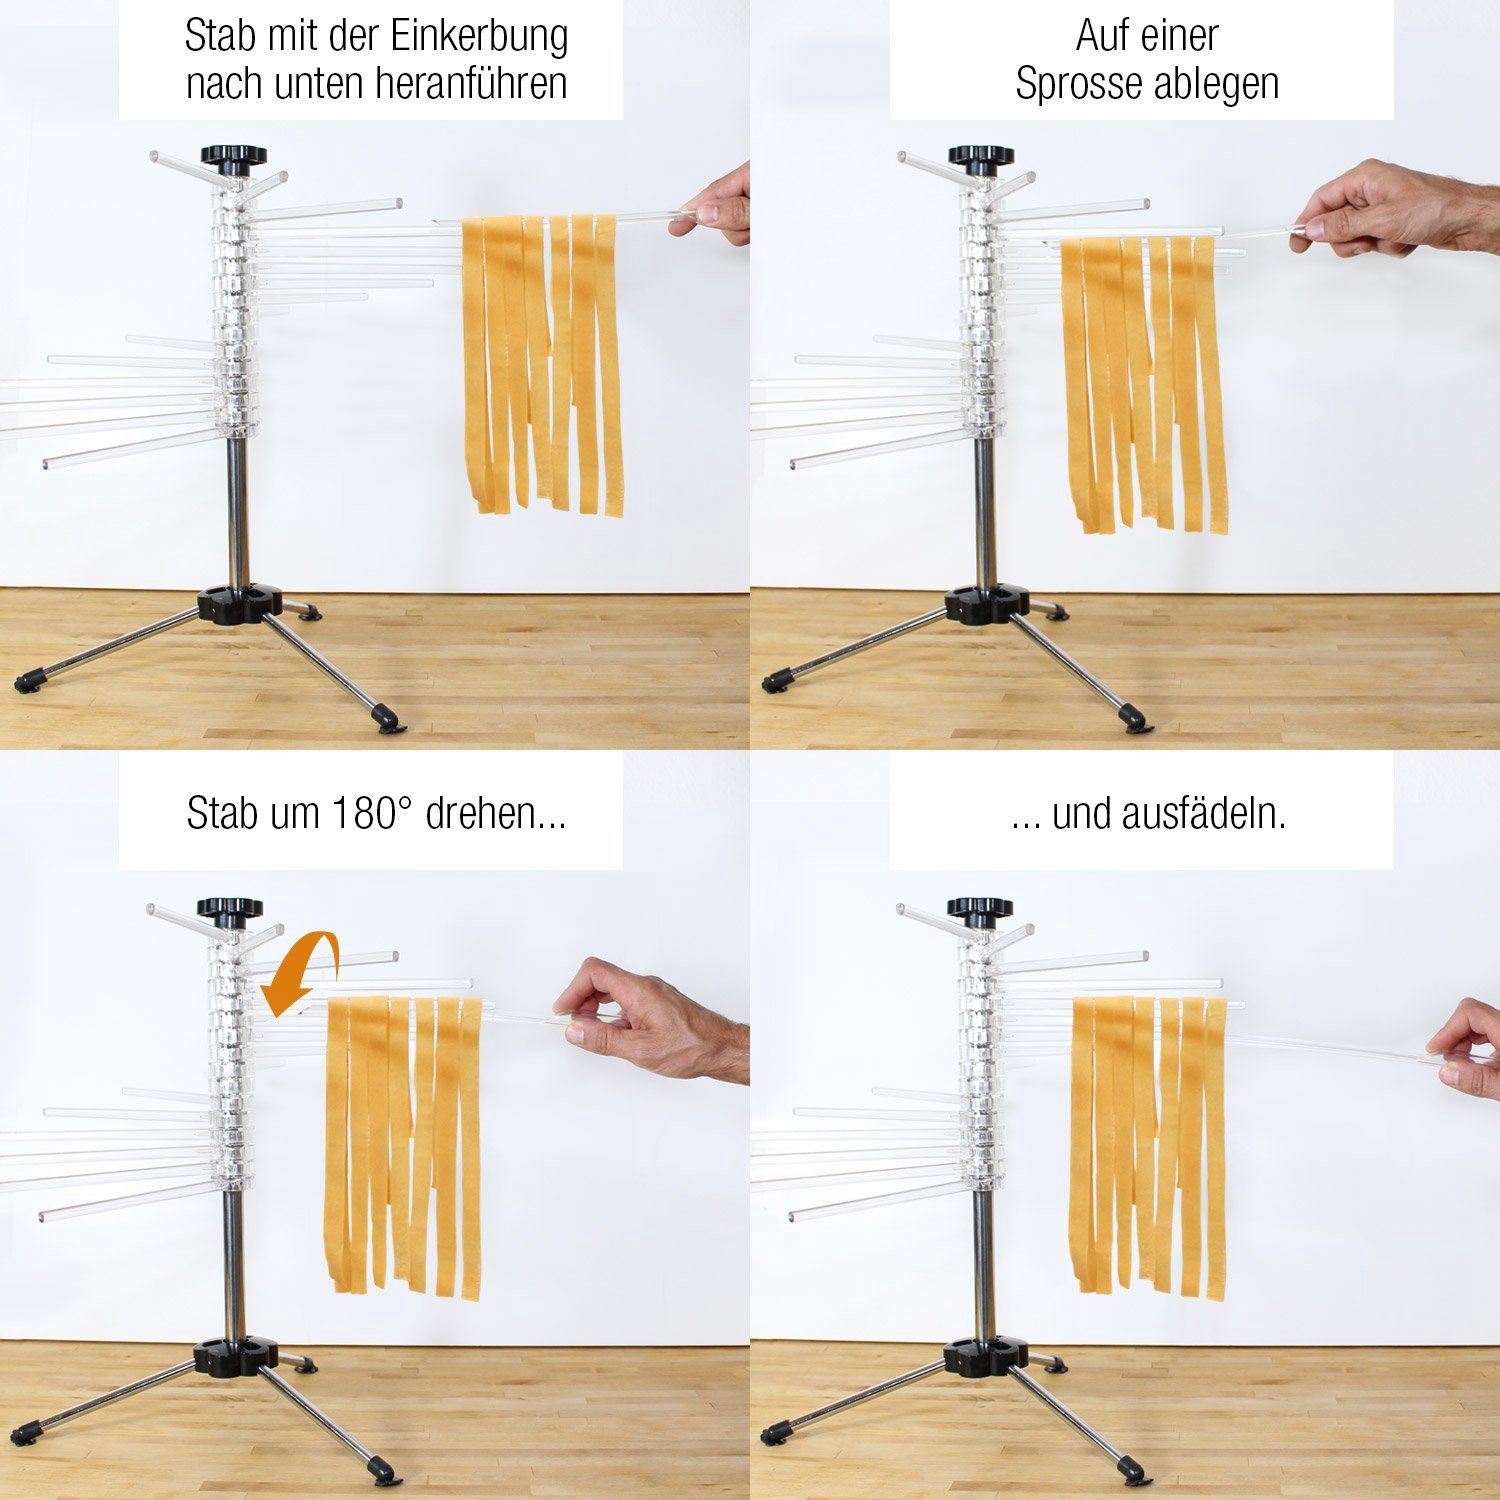 Top Kitchen Accessories Noodle Spaghetti Drying Rack Safe Material Pasta Holder Stand Dryer Cooking Tools Gadget